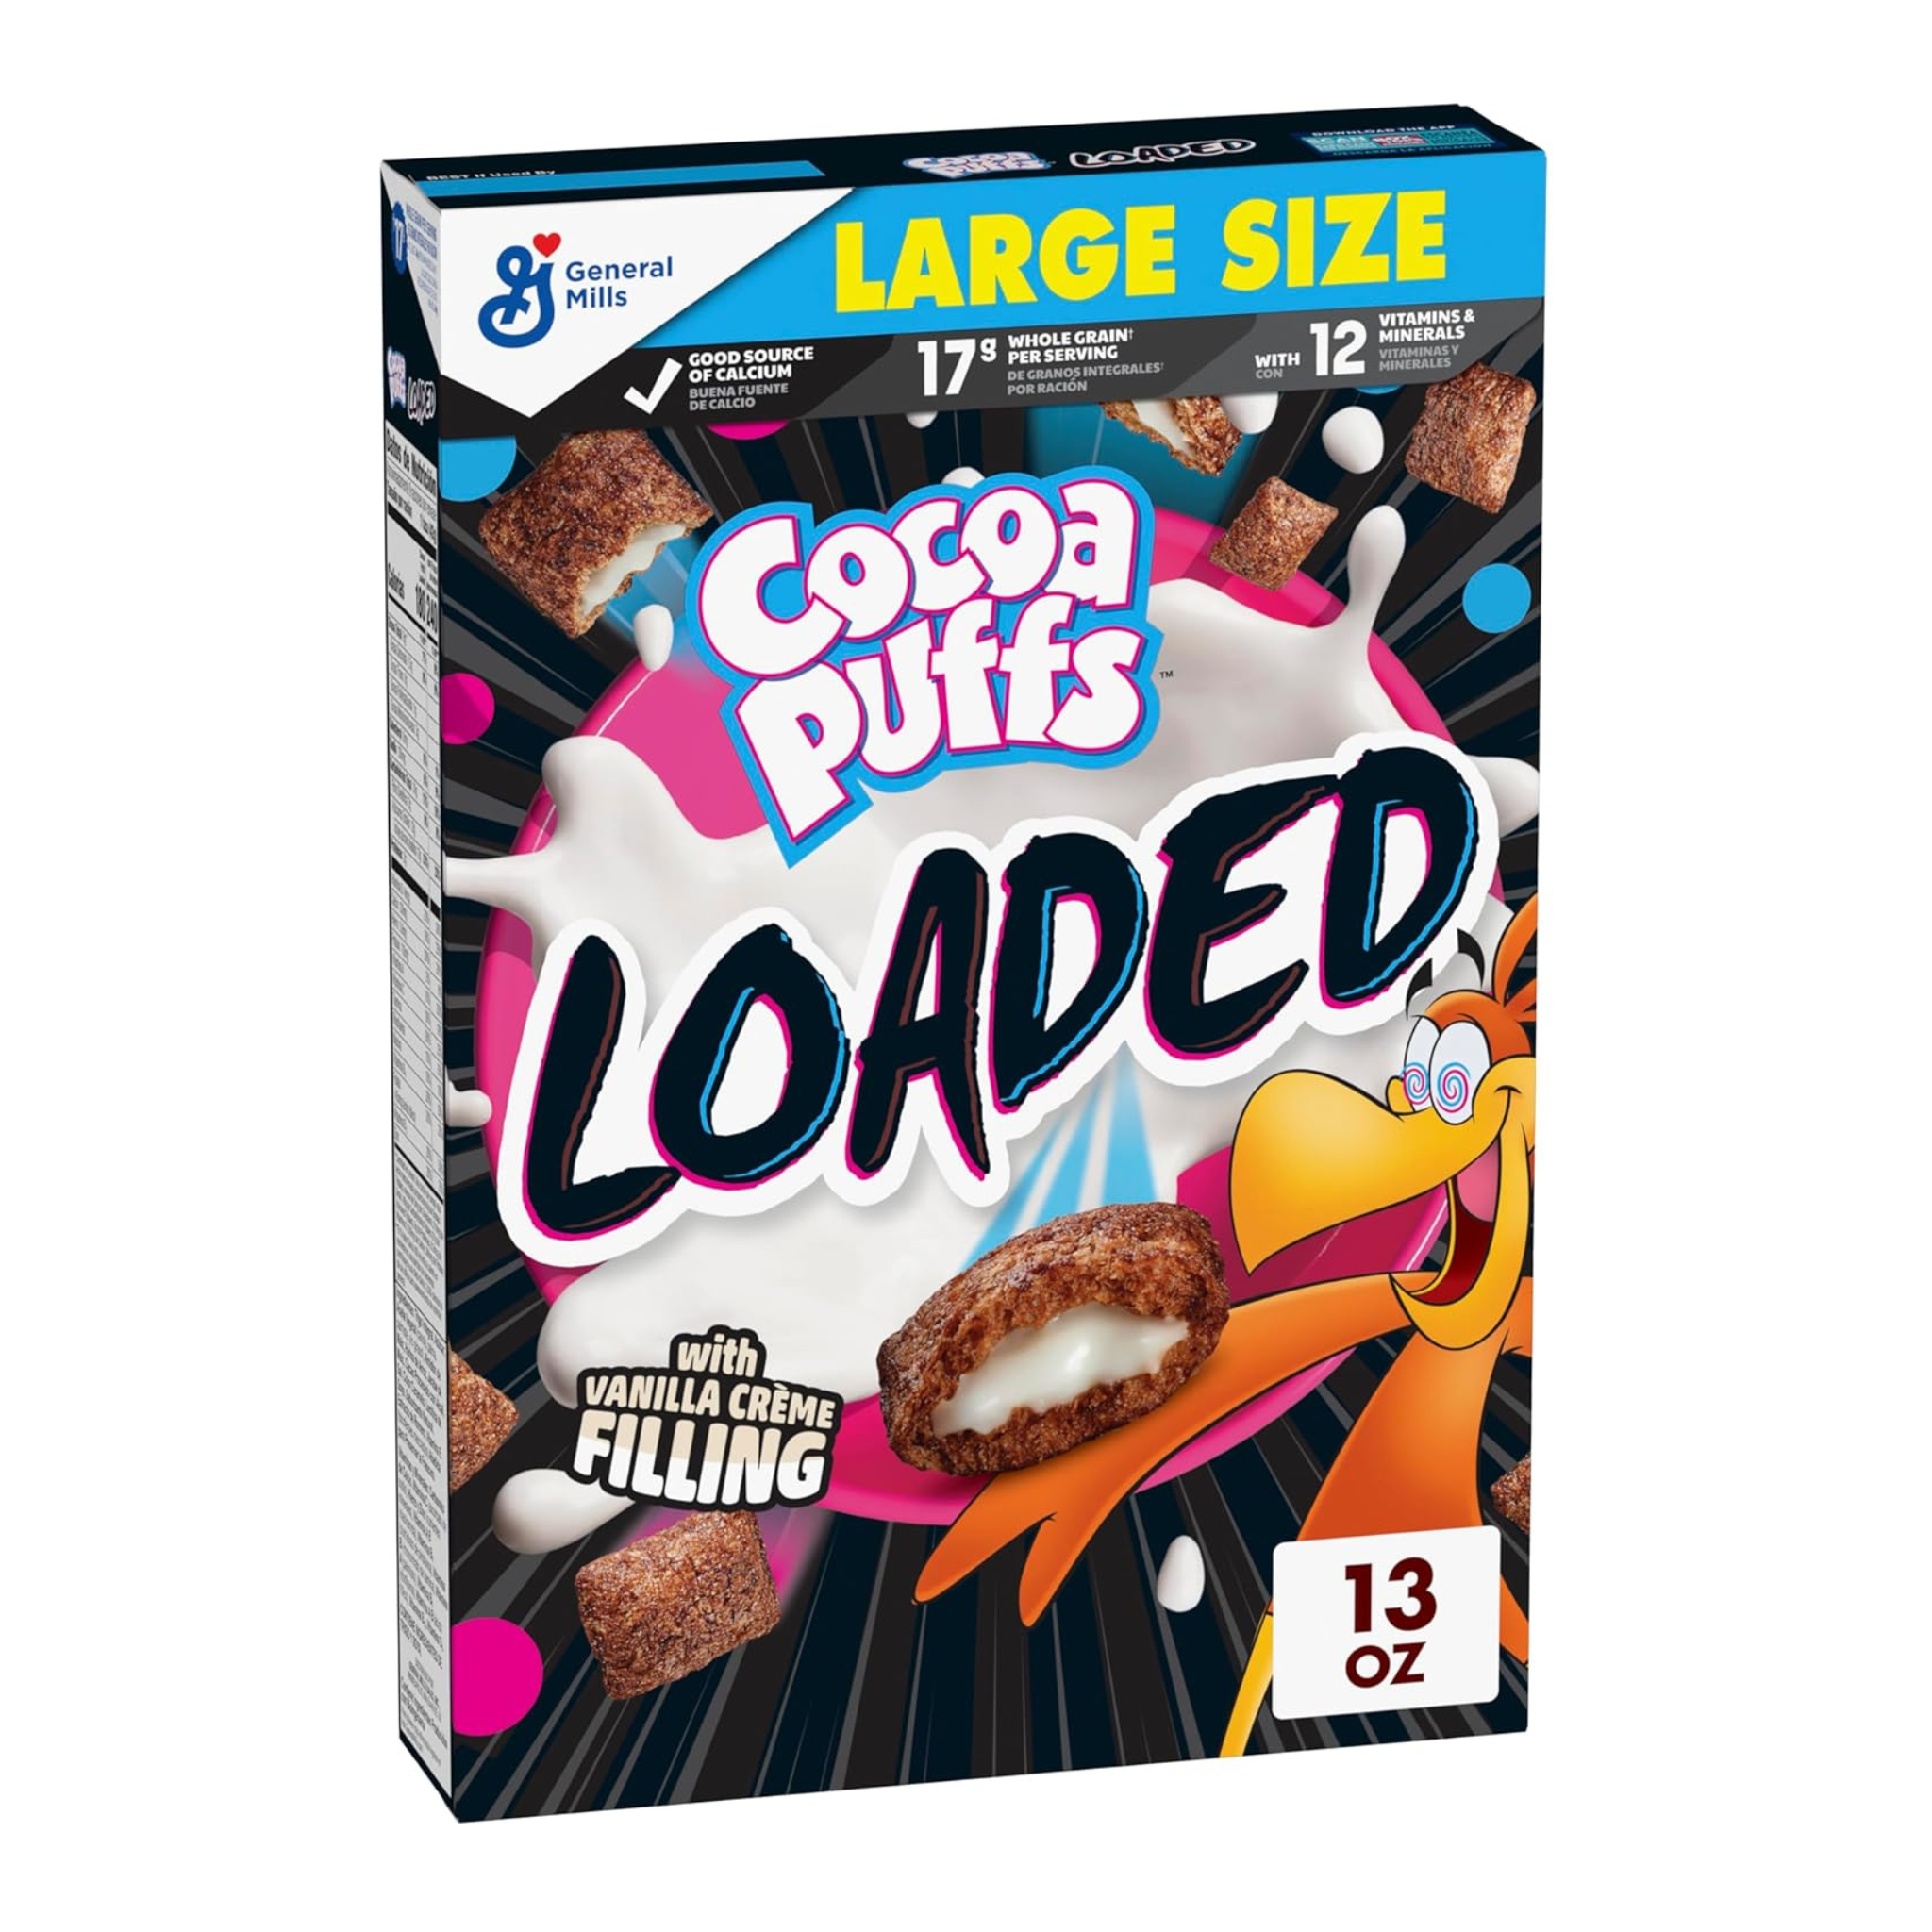 Cocoa Puffs Loaded Cereal, Chocolatey Cereal With Artificially Flavored Vanilla Crème Filling (Large Size, 13 oz)